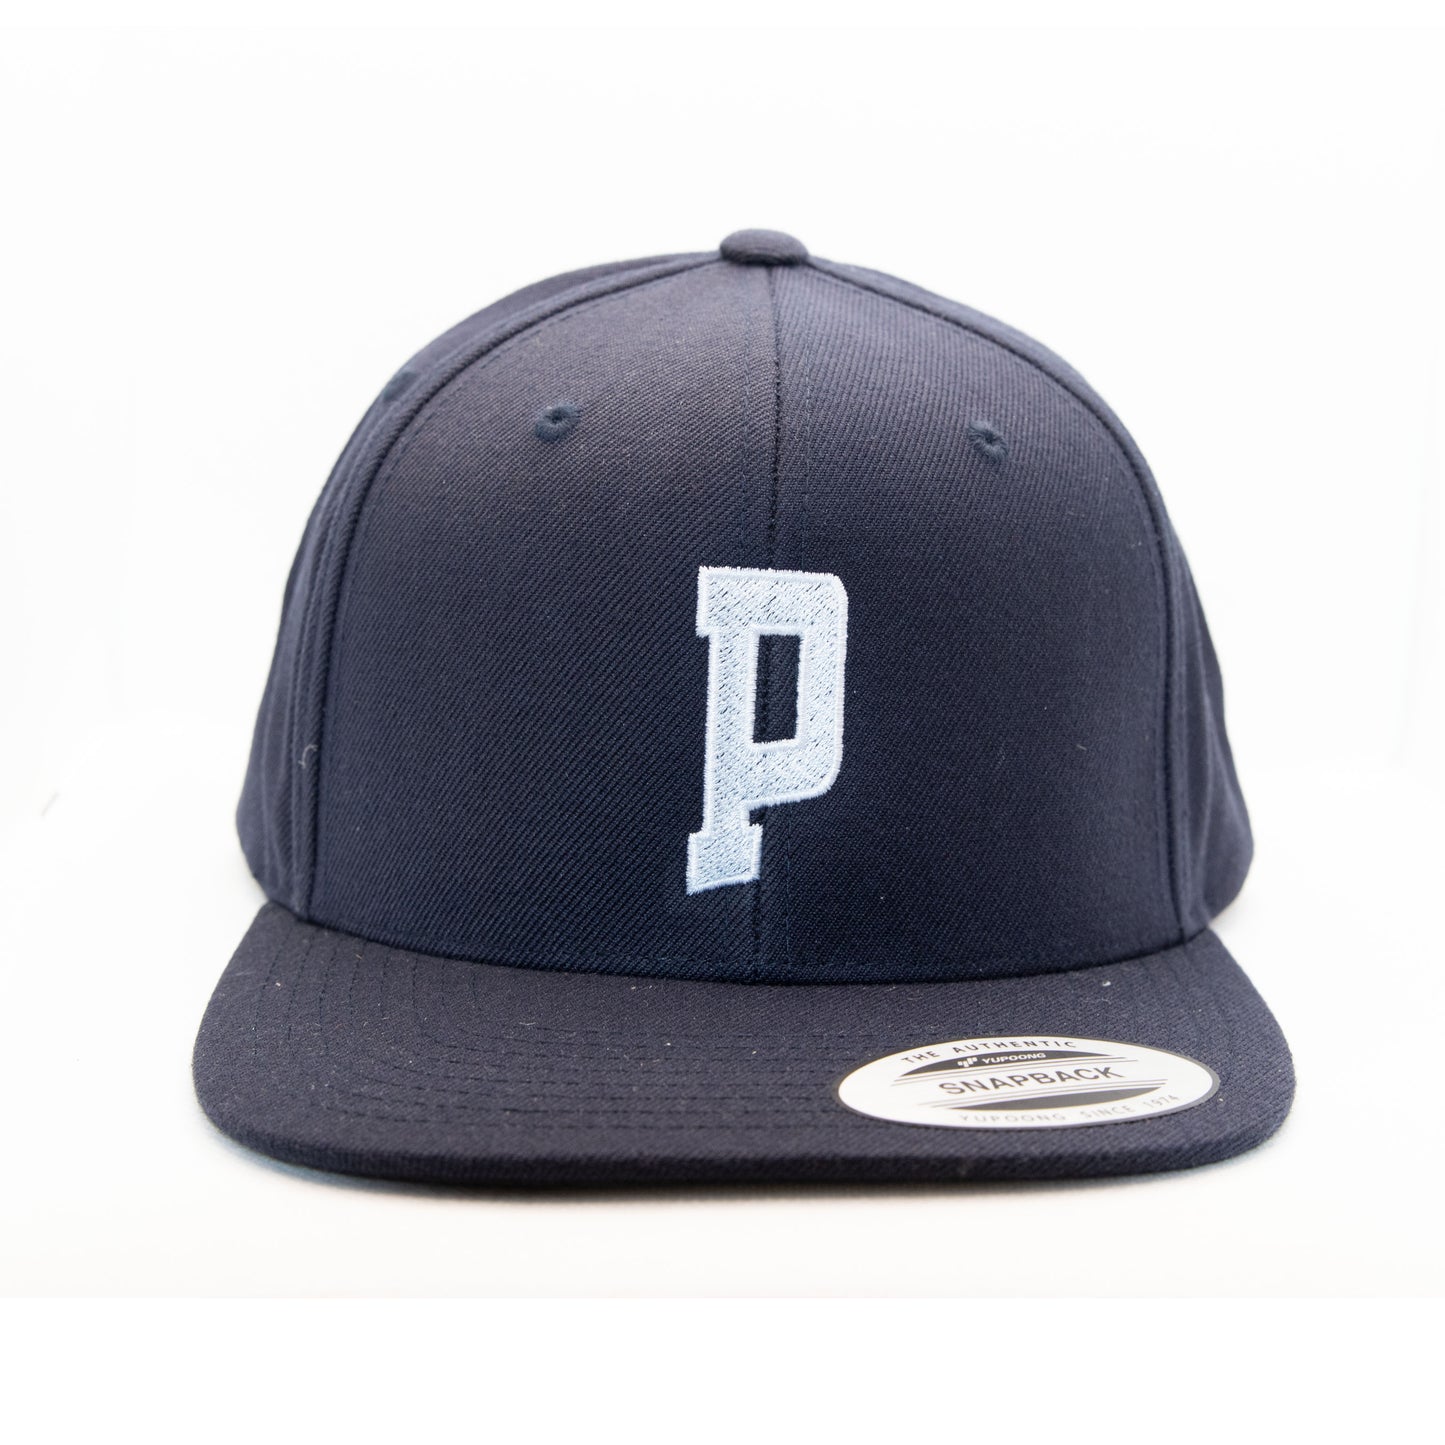 Phantoms Snapback Cap - Silver and White Outline